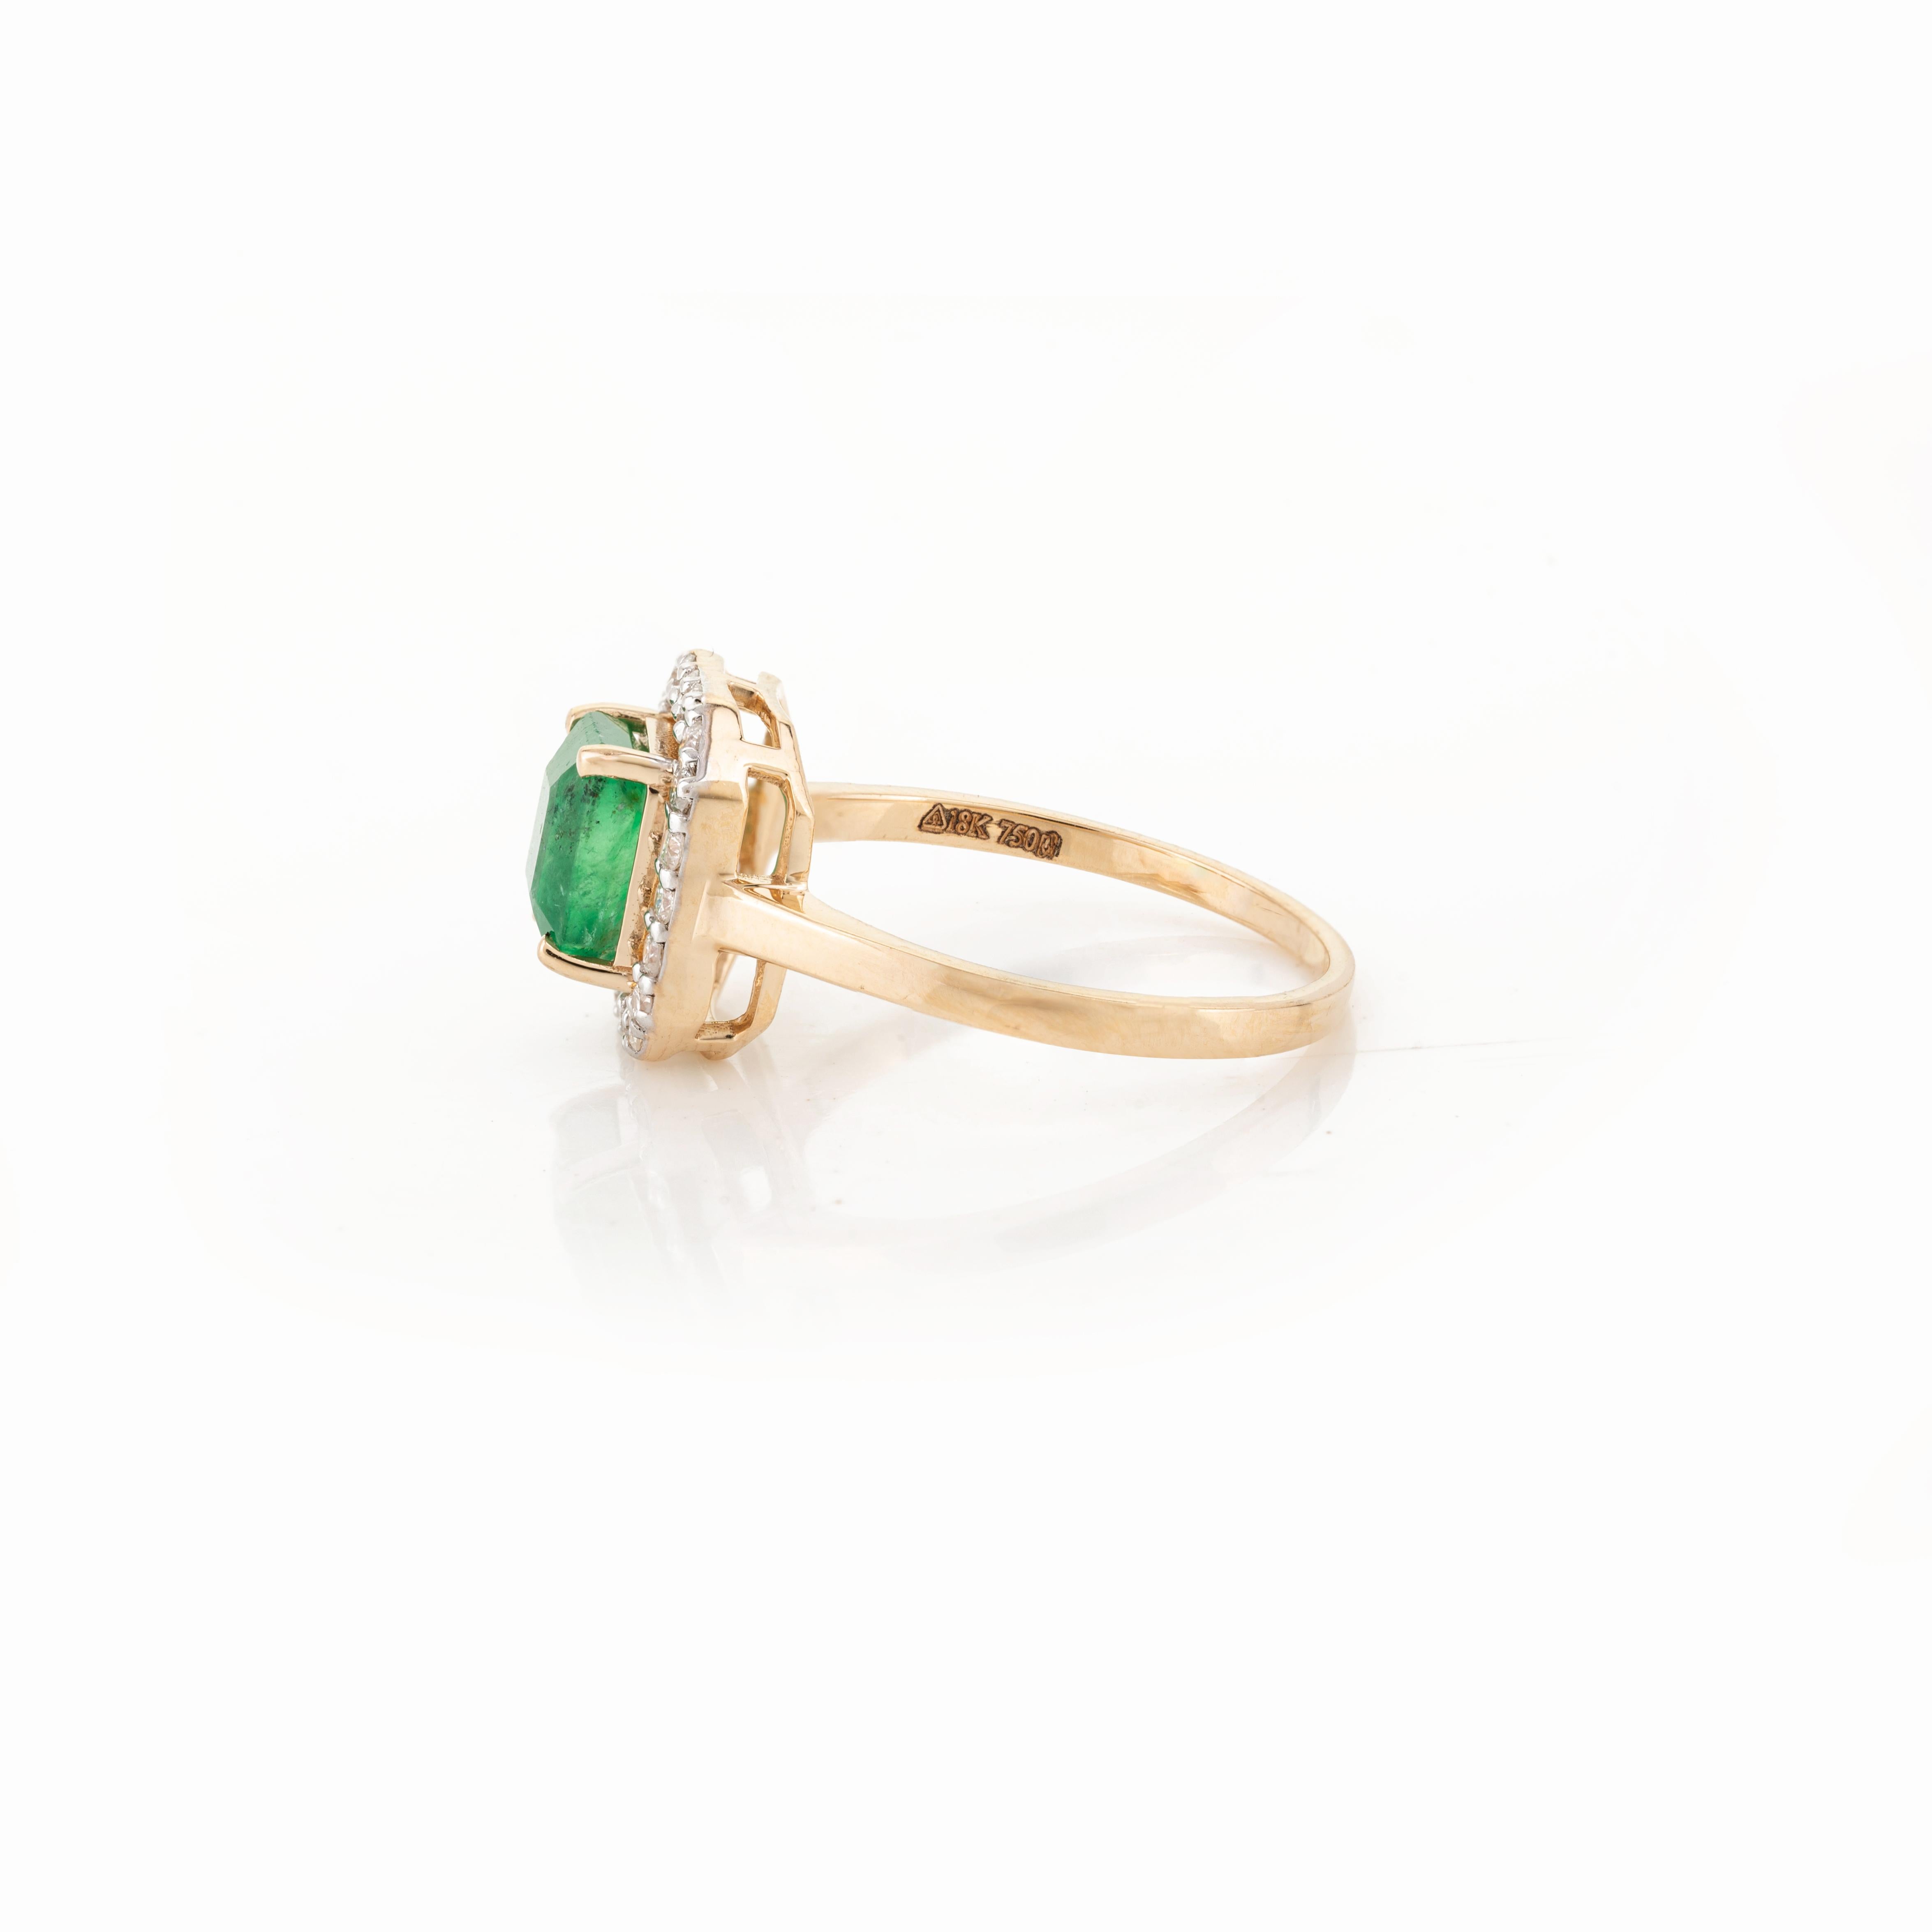 For Sale:  1.5 Carat Octagon Emerald Halo Diamond Wedding Ring in 18k Yellow Gold 5